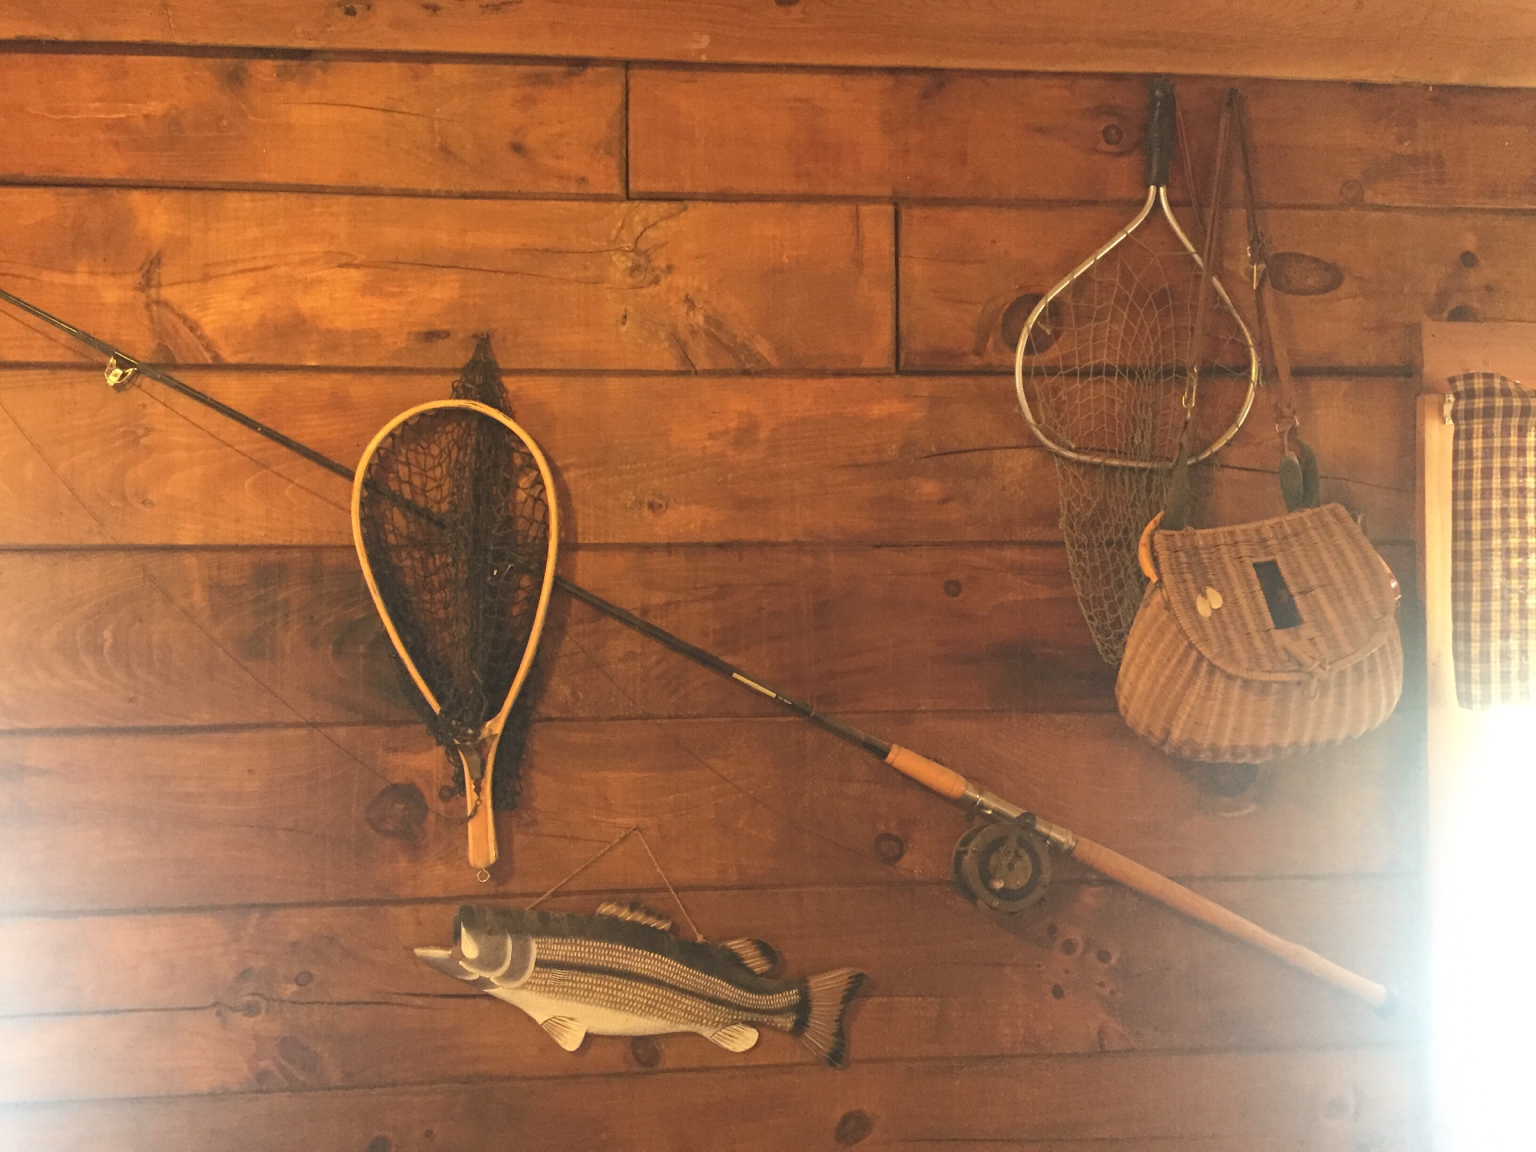 Antiques fishing wall decorations - Classifieds - Buy, Sell, Trade or Rent  - Lake Ontario United - Lake Ontario's Largest Fishing & Hunting Community  - New York and Ontario Canada